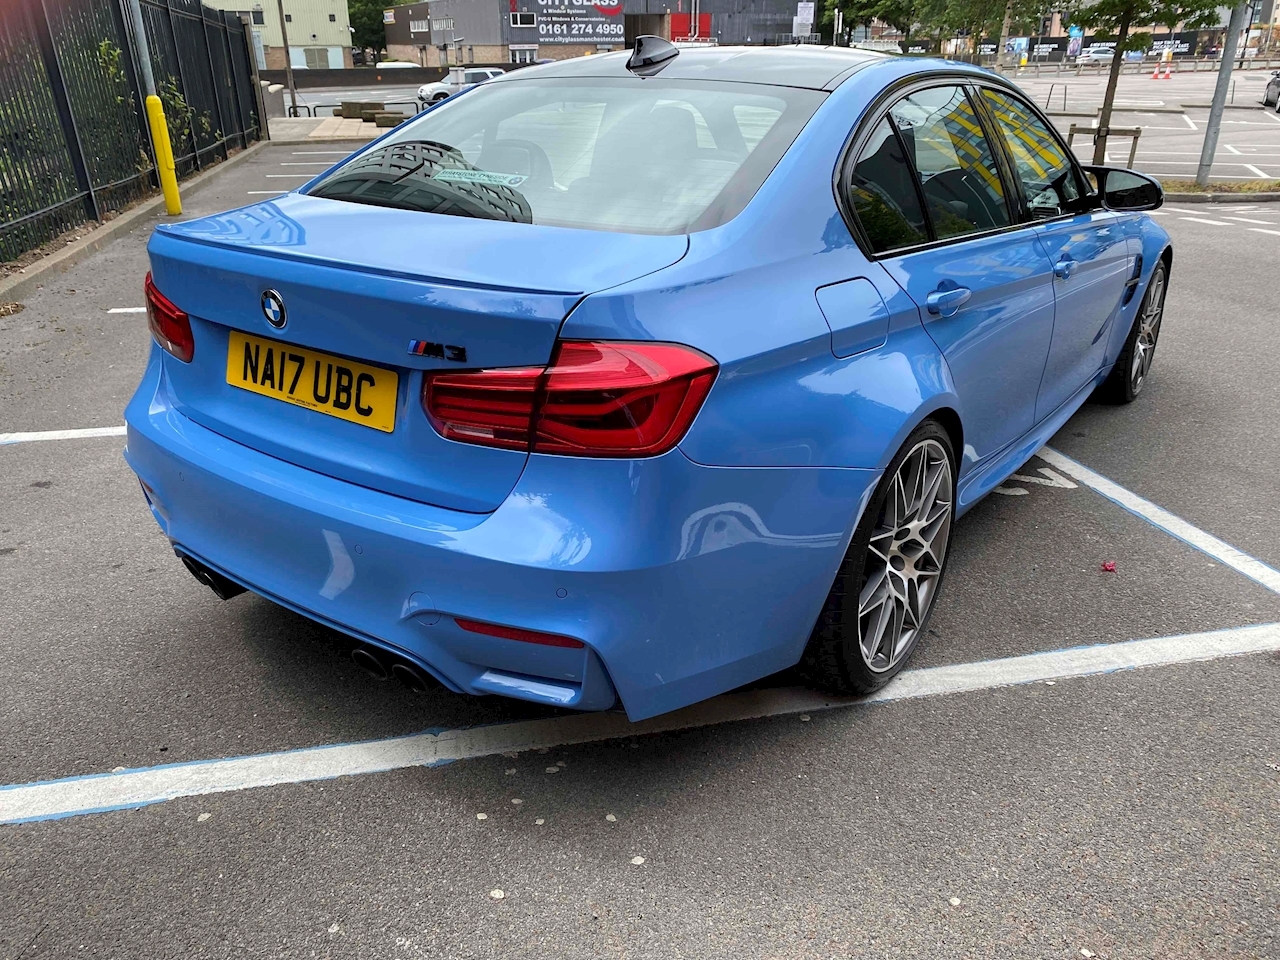 Used 17 Bmw 3 Series M3 Competition Package 3 0 4dr Saloon Semi Auto Petrol For Sale In Altrincham Smartfish Group Ltd T A Albion Car Sales